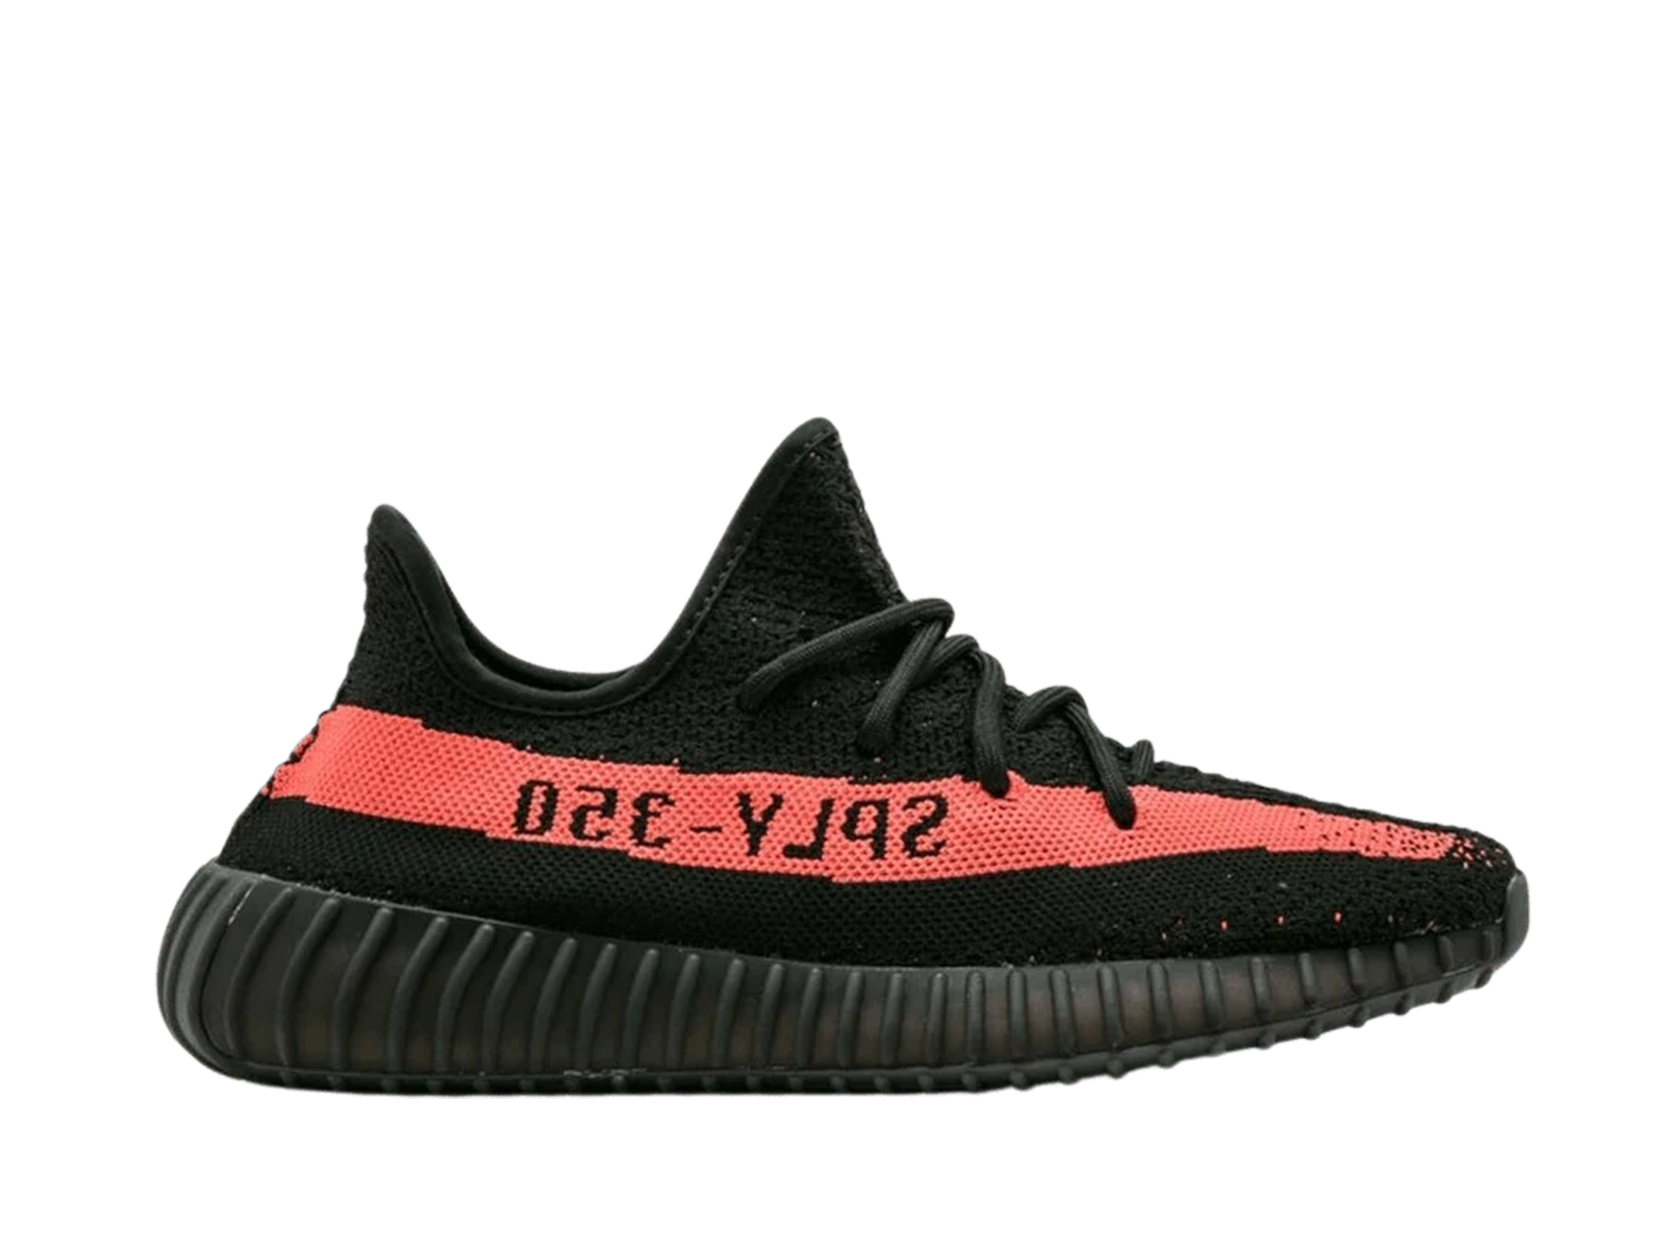 Double Boxed  399.99 adidas Yeezy Boost 350 V2 Core Black Red Stripe Double Boxed